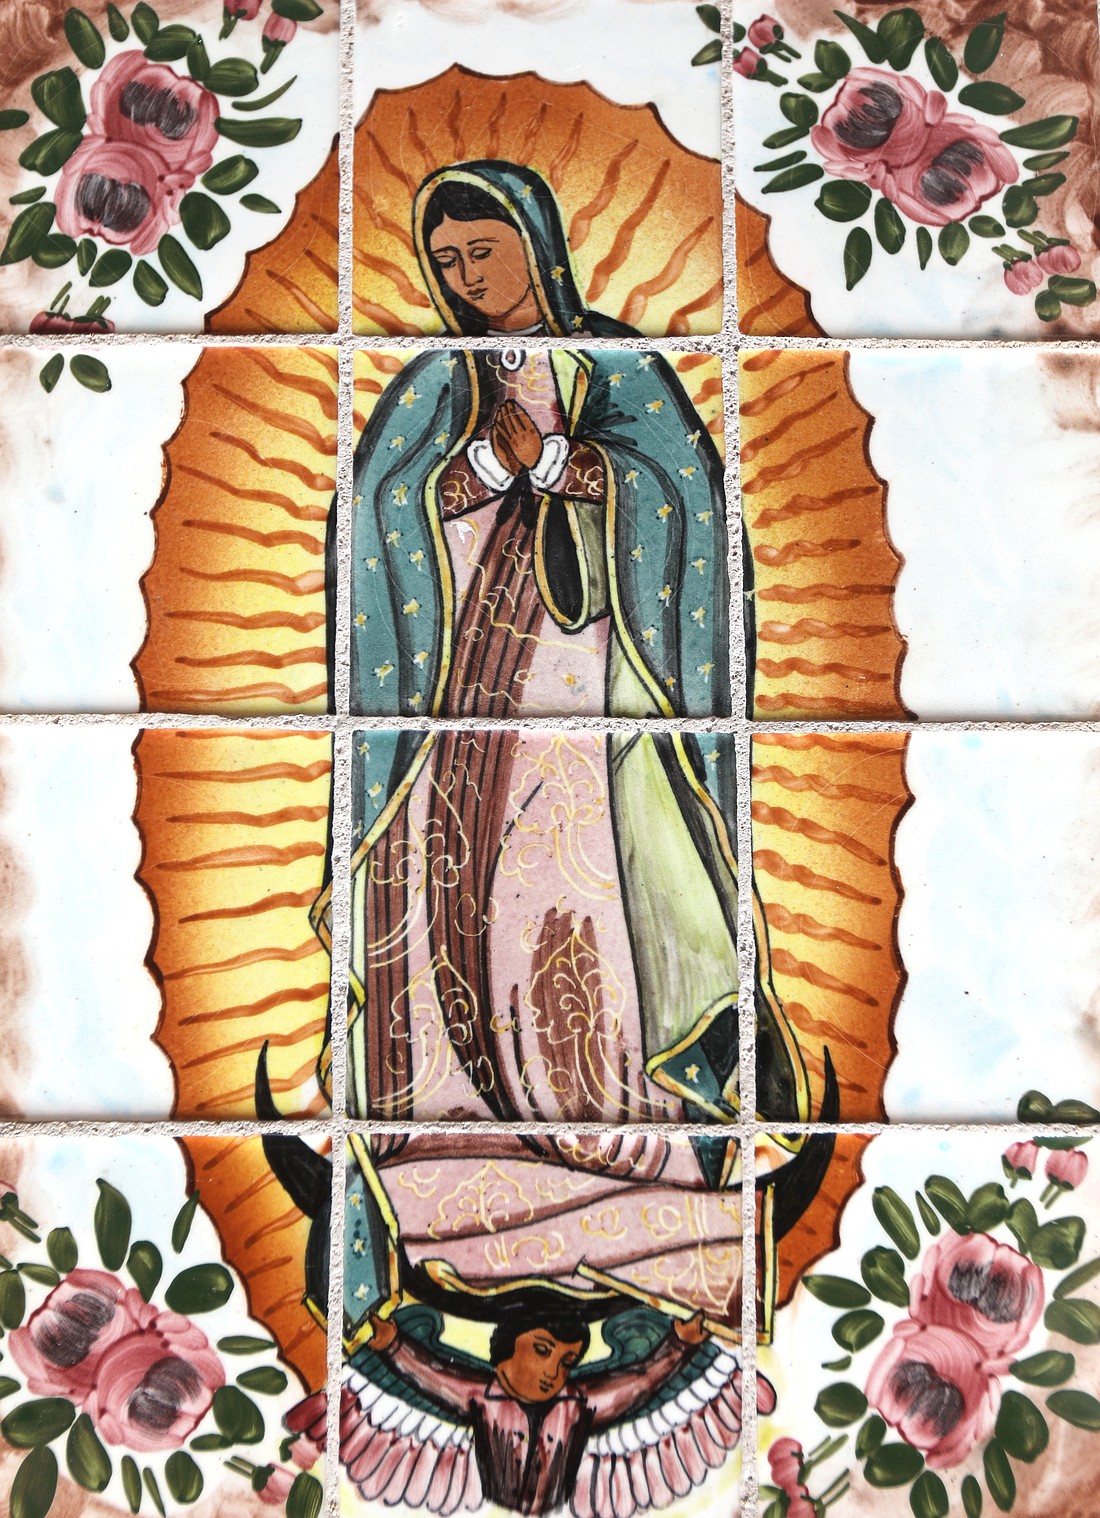 An image of Our Lady of Guadalupe is seen at San Xavier del Bac Mission in Pima County, Ariz., outside Tucson, May 28, 2023. (OSV News photo/Bob Roller)